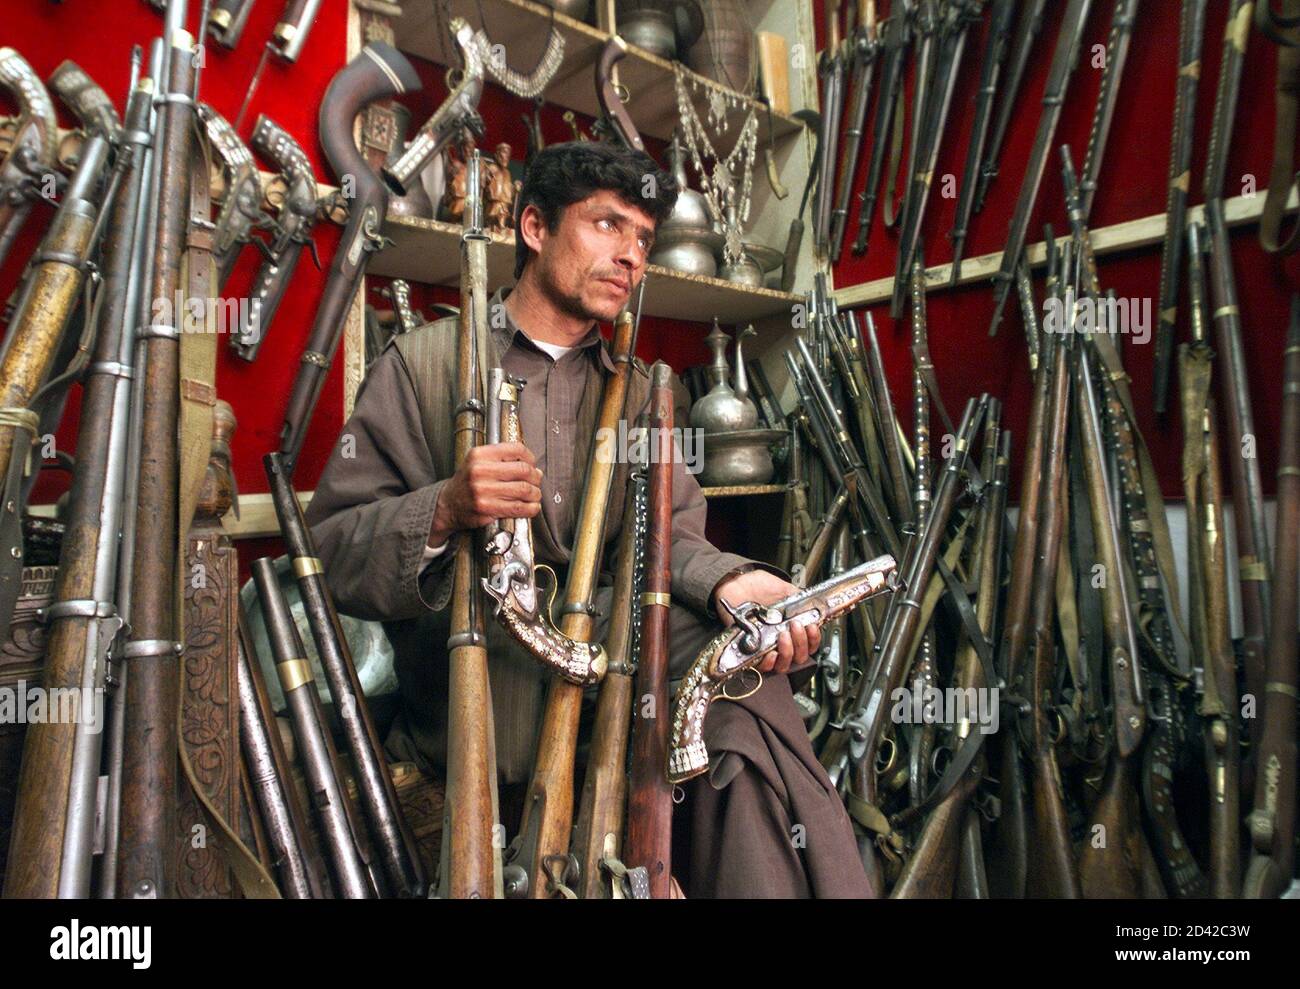 An Afghan shopkeeper lifts an antique rifle at his shop in Kabul on April  5, 2003. The price of a piece depends on its age and quality and can reach  as much